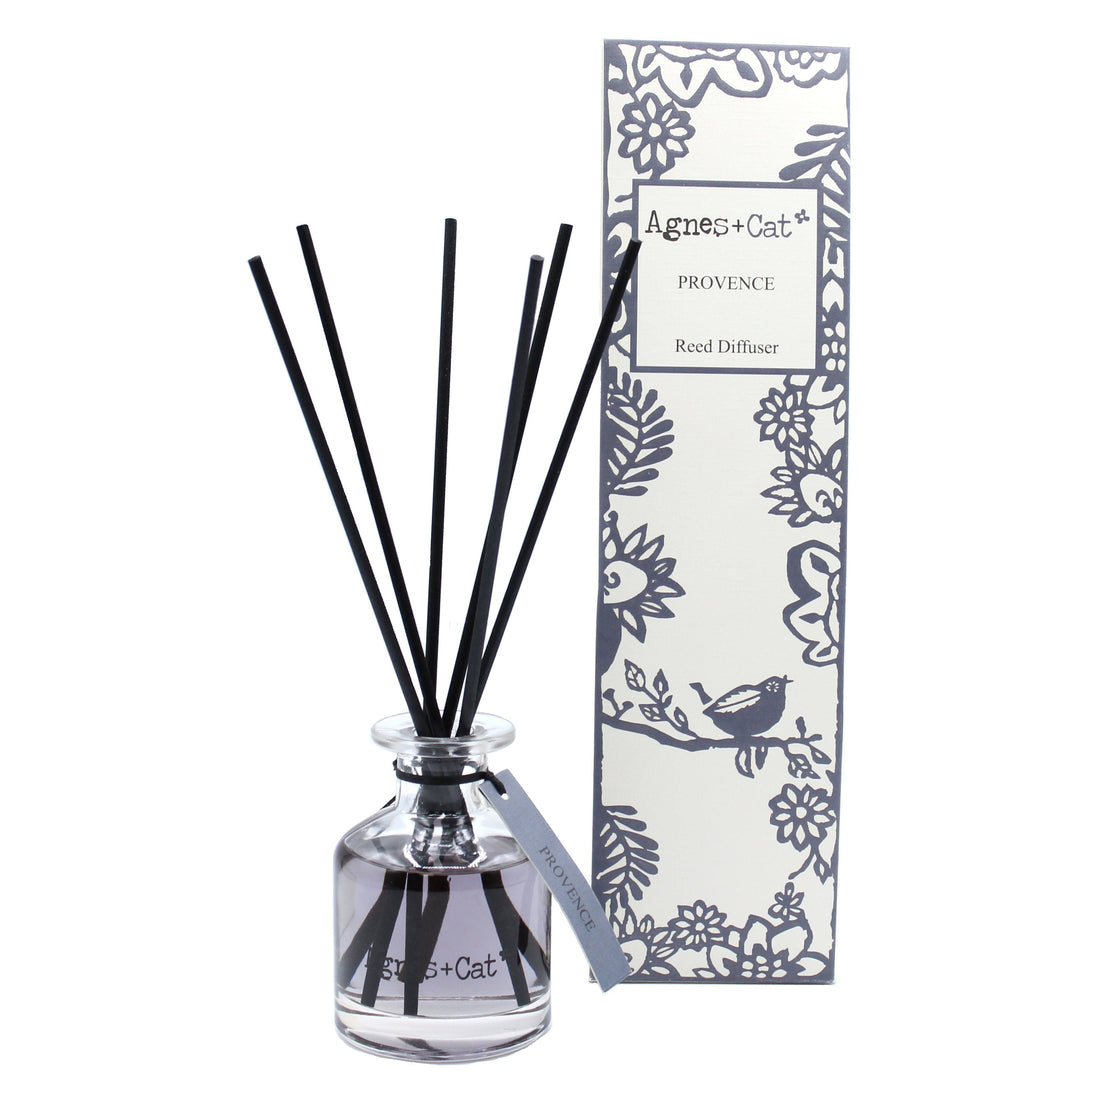 Box of 140ml Reed Diffuser - Provence - best price from Maltashopper.com ACD-22DS